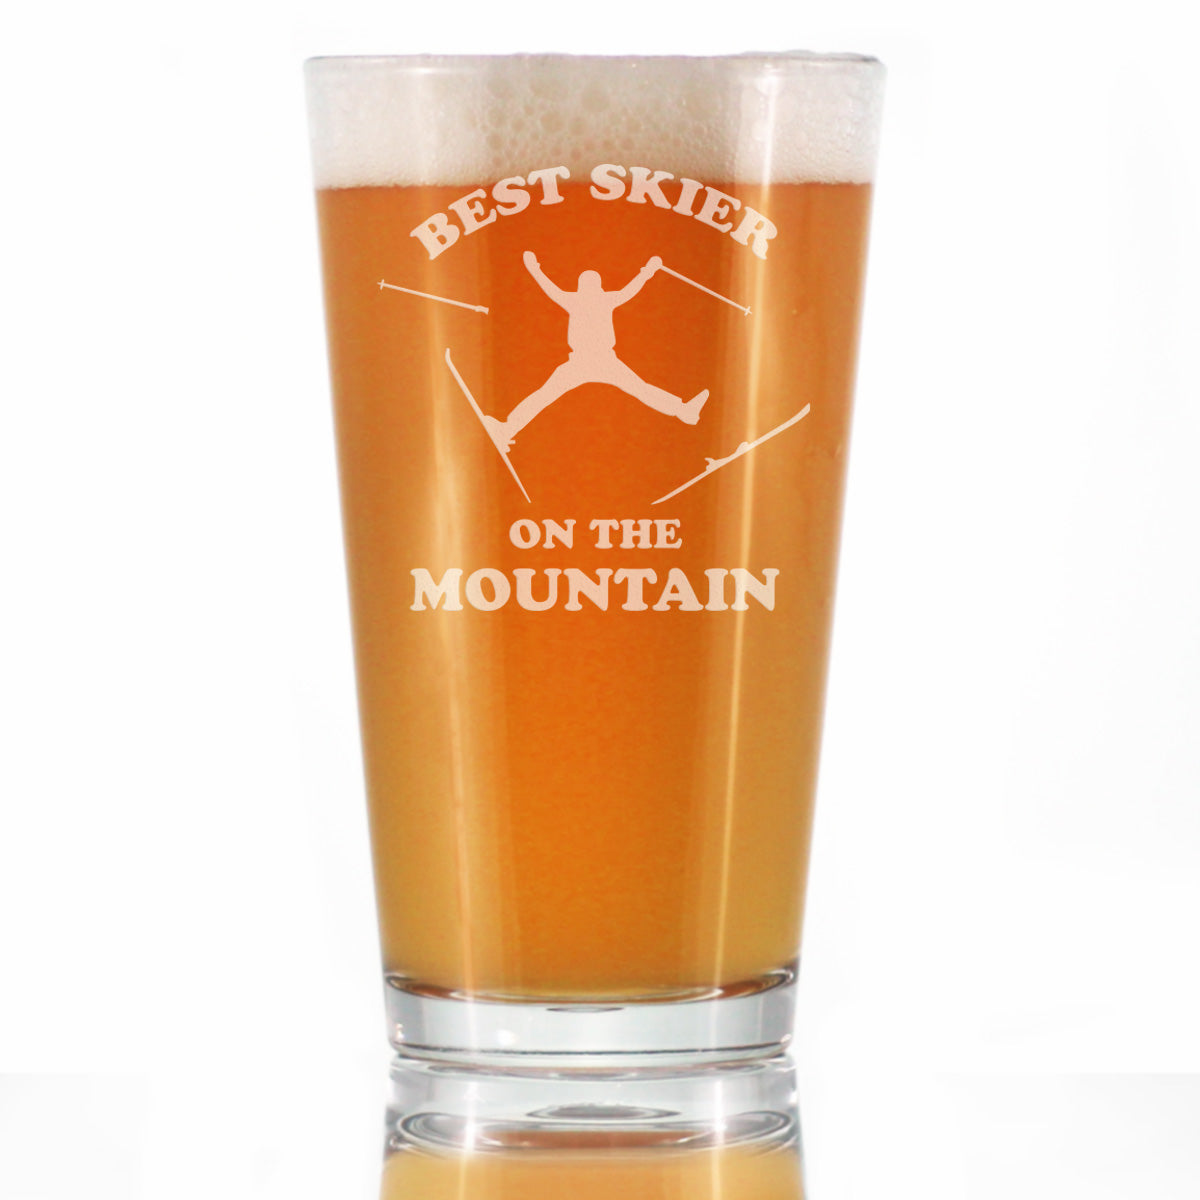 Best Skier - Pint Glass for Beer - Unique Skiing Themed Decor and Gifts for Mountain Lovers - 16 oz Glasses